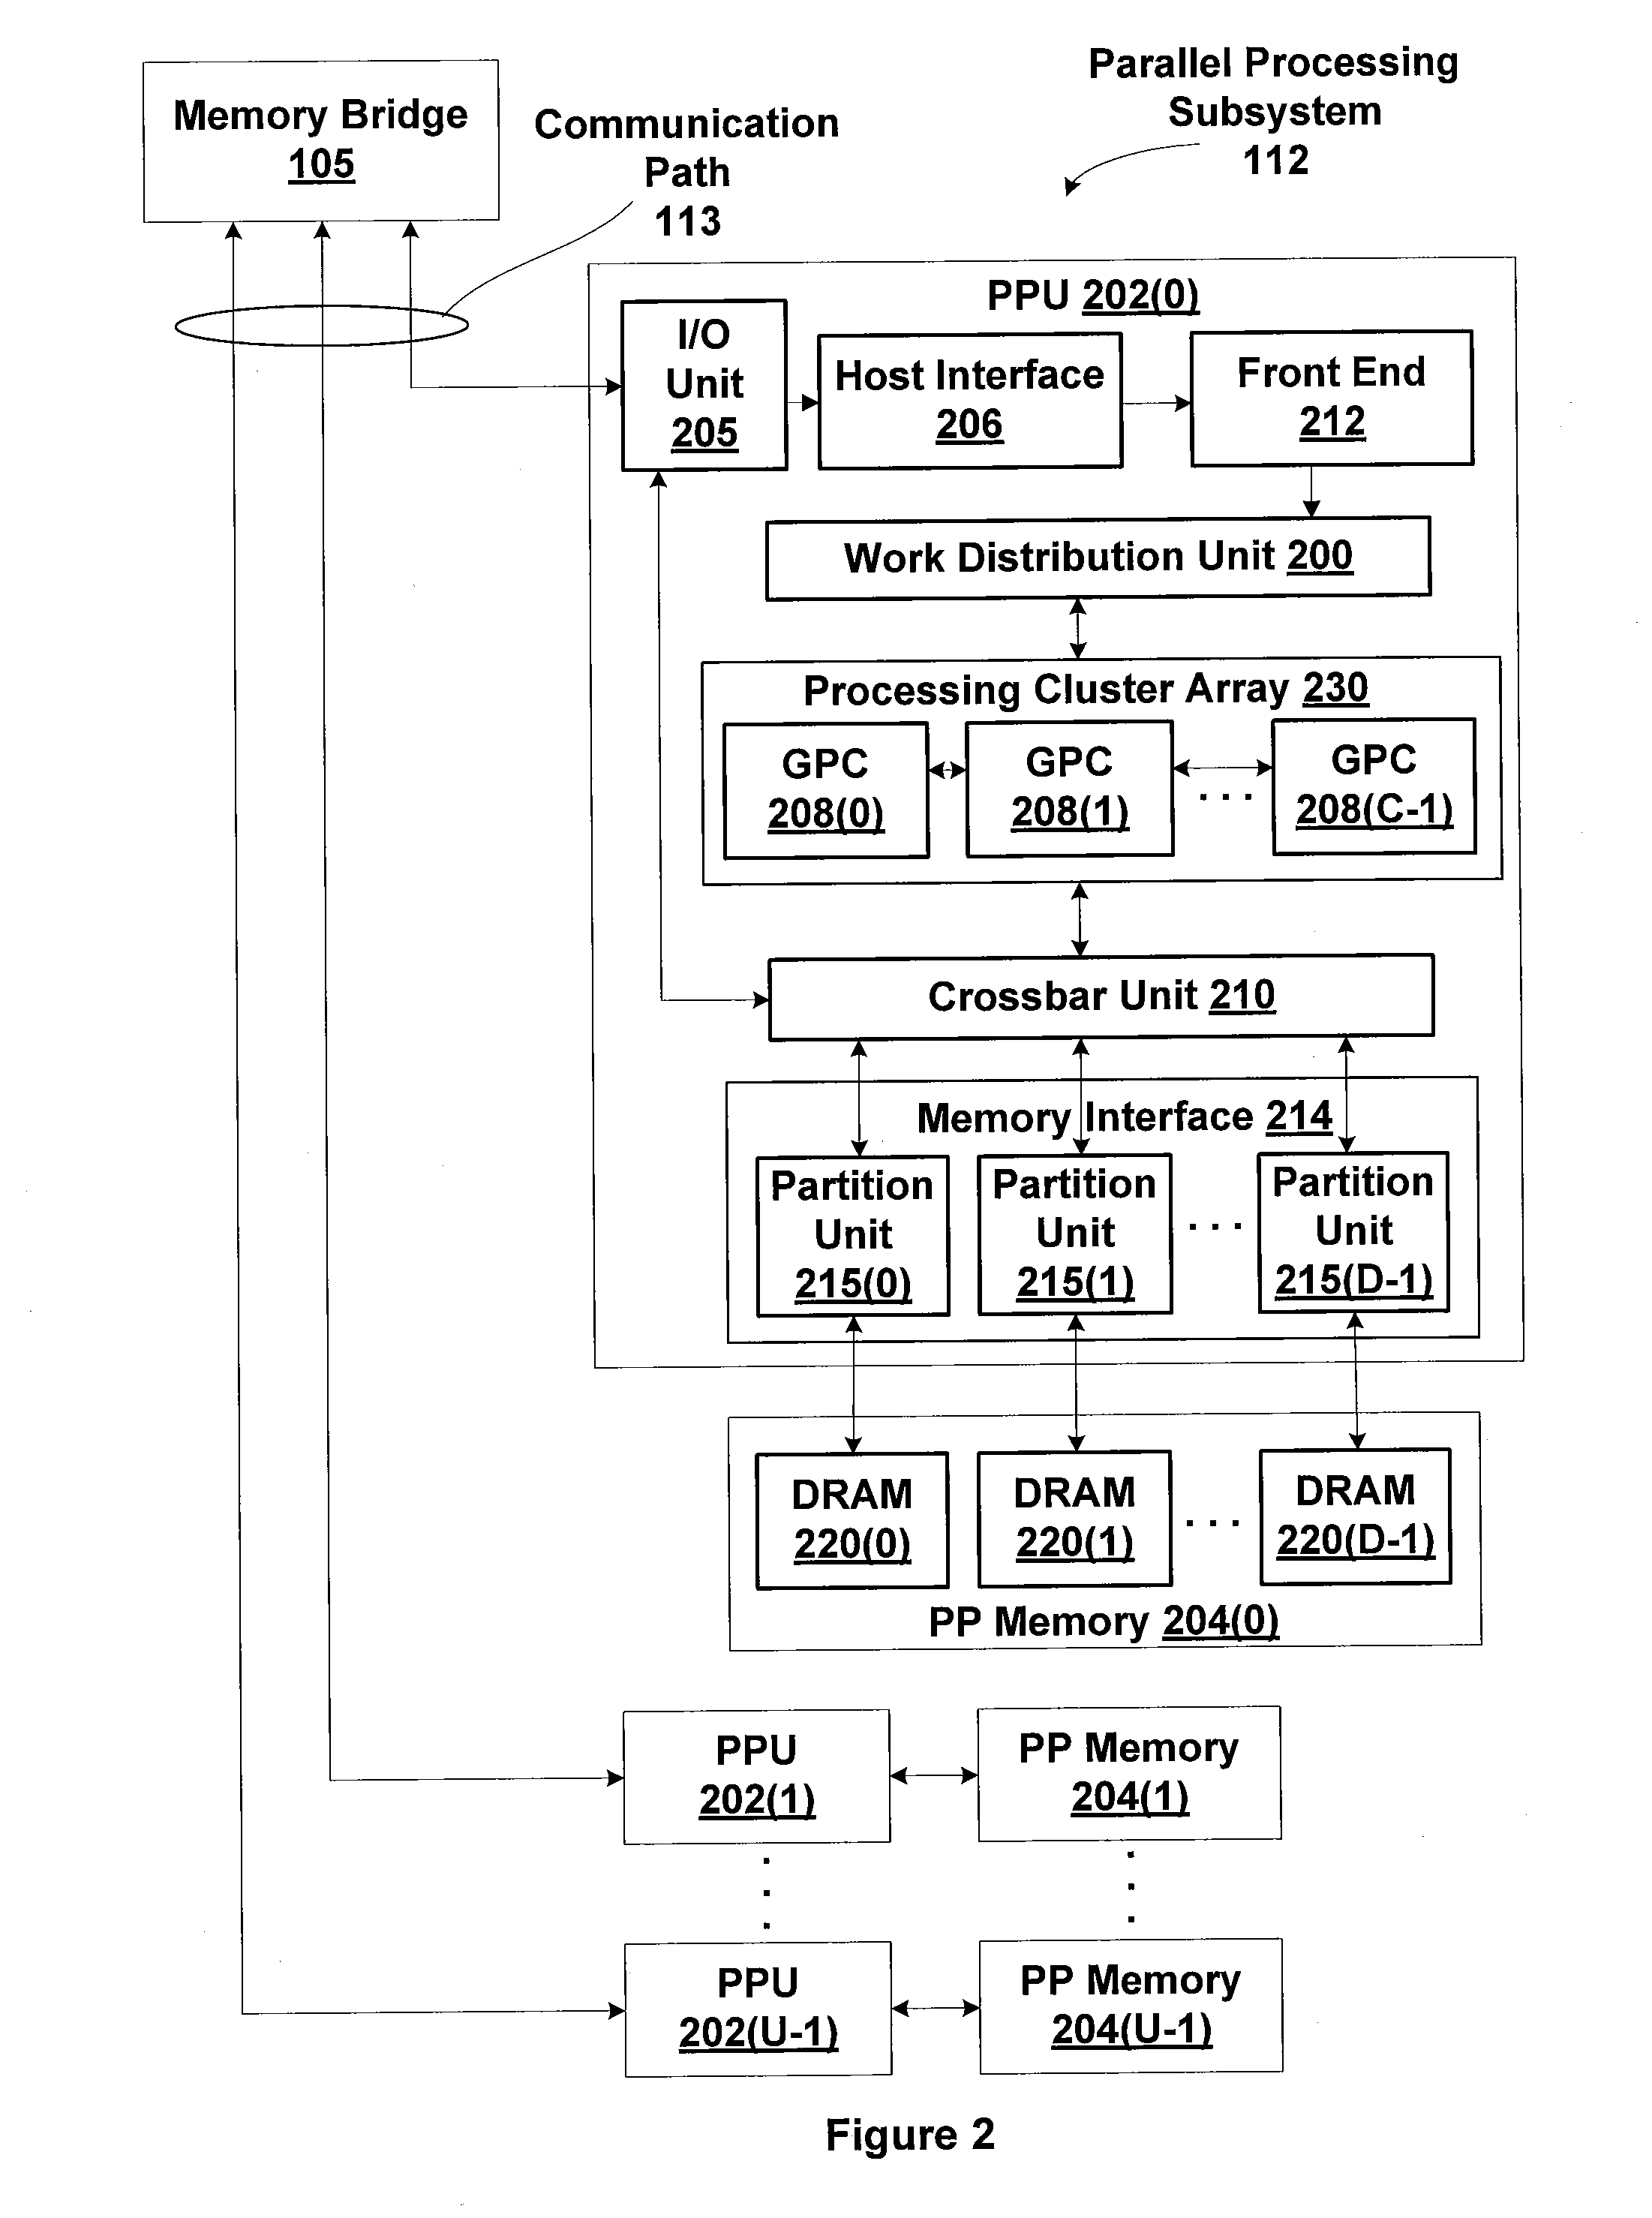 Architecture and Instructions for Accessing Multi-Dimensional Formatted Surface Memory